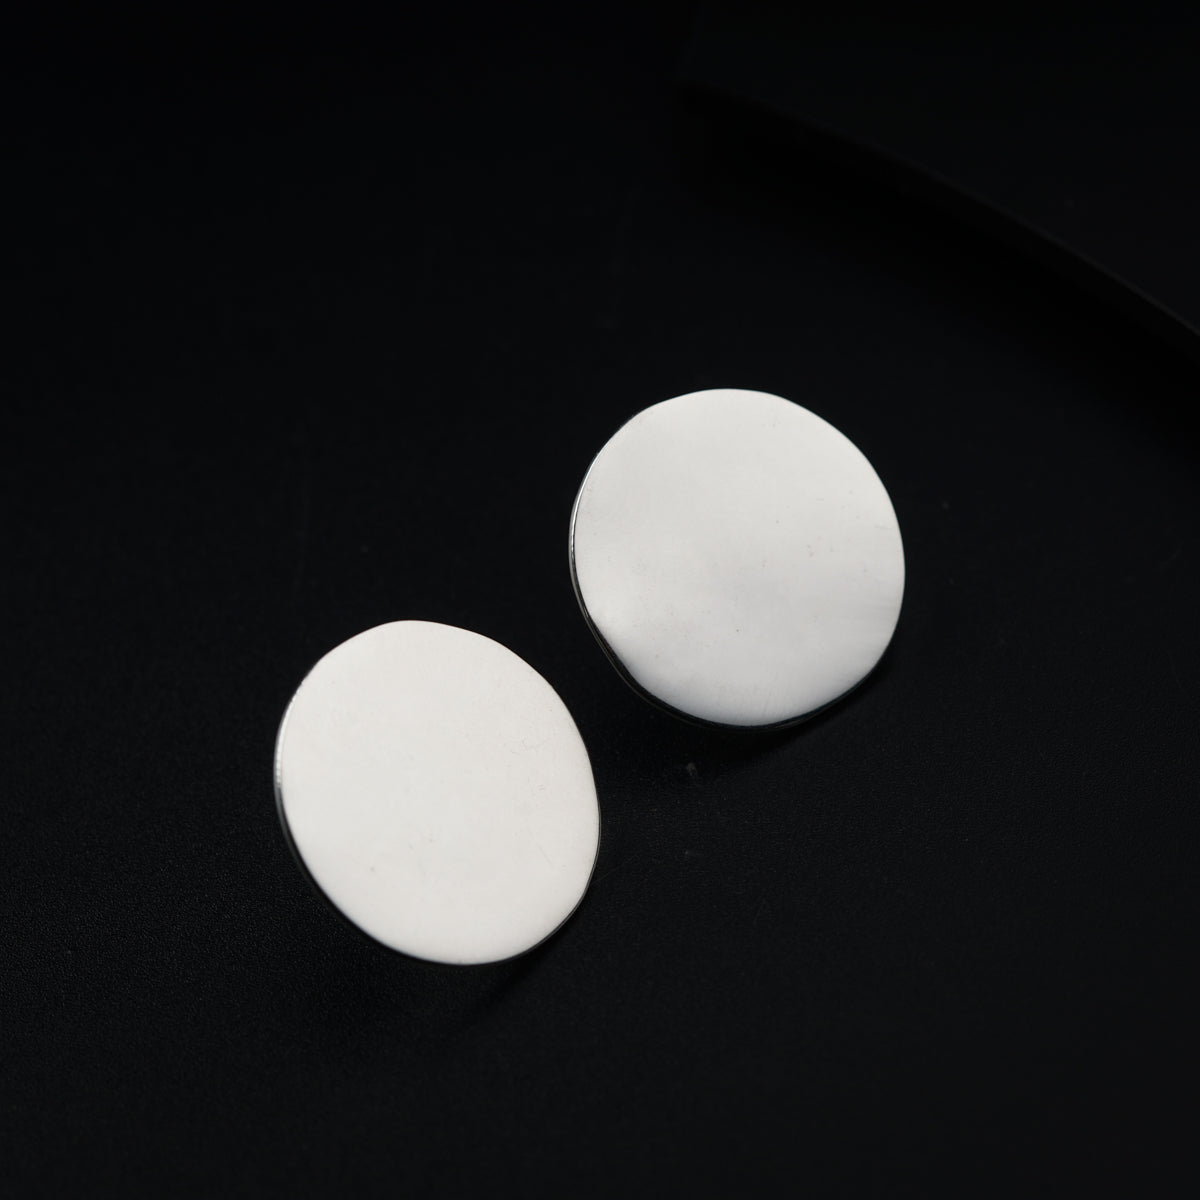 a pair of white buttons sitting on top of a black surface